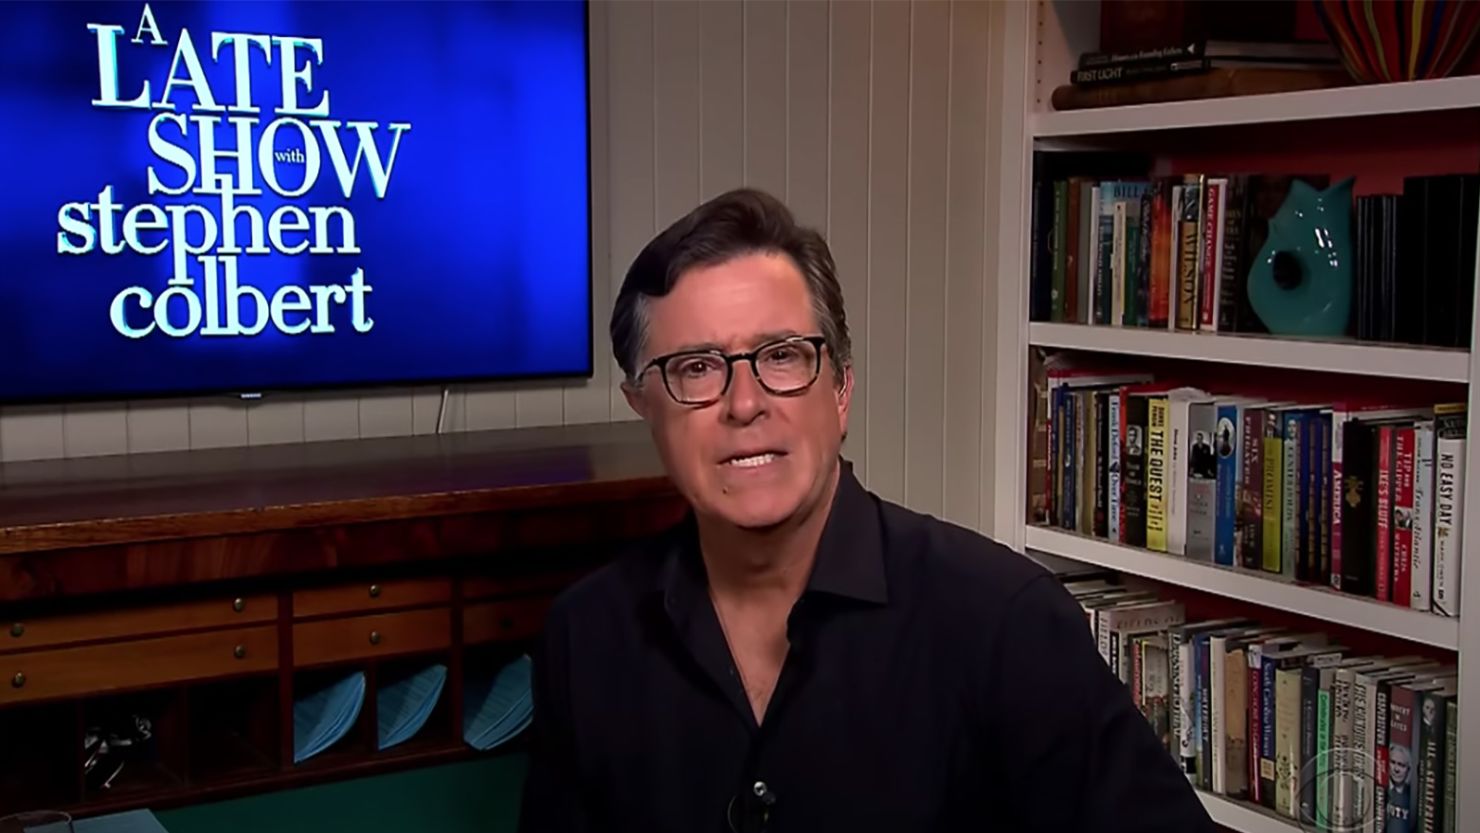 The Late Show with Stephen Colbert: American citizens in 430 towns and cities took to the streets yesterday to peacefully protest systemic racism and police brutality, while stepped-up enforcements of curfews created alarming scenes of violence against the demonstrators. #Colbert #StephenAtHome #Monologue
